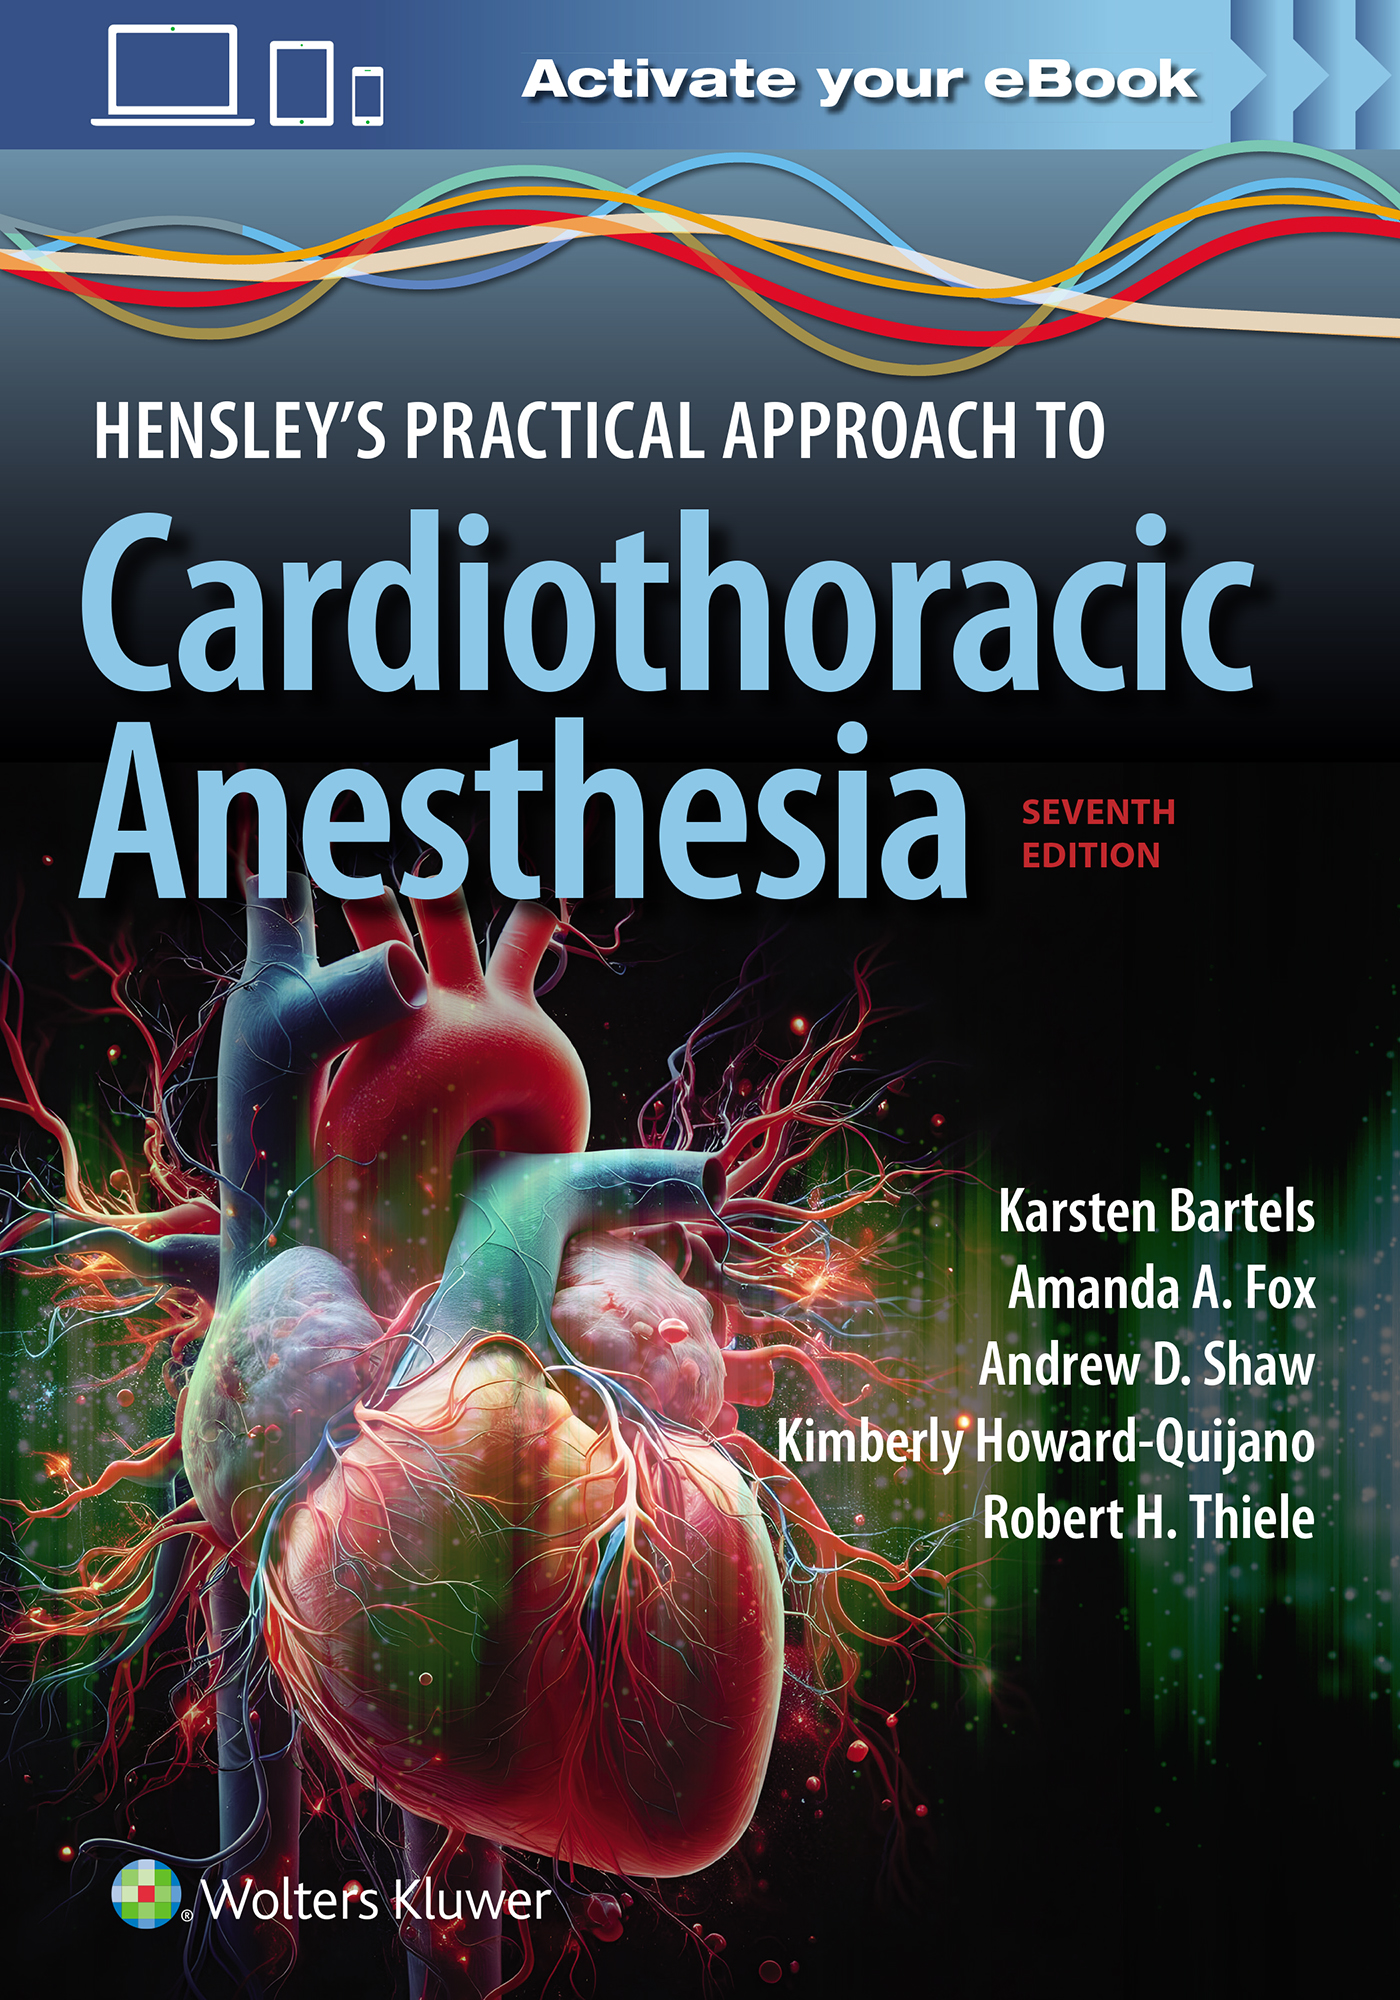 Hensley's Practical Approach to CardiothoracicAnesthesia, 7th ed.